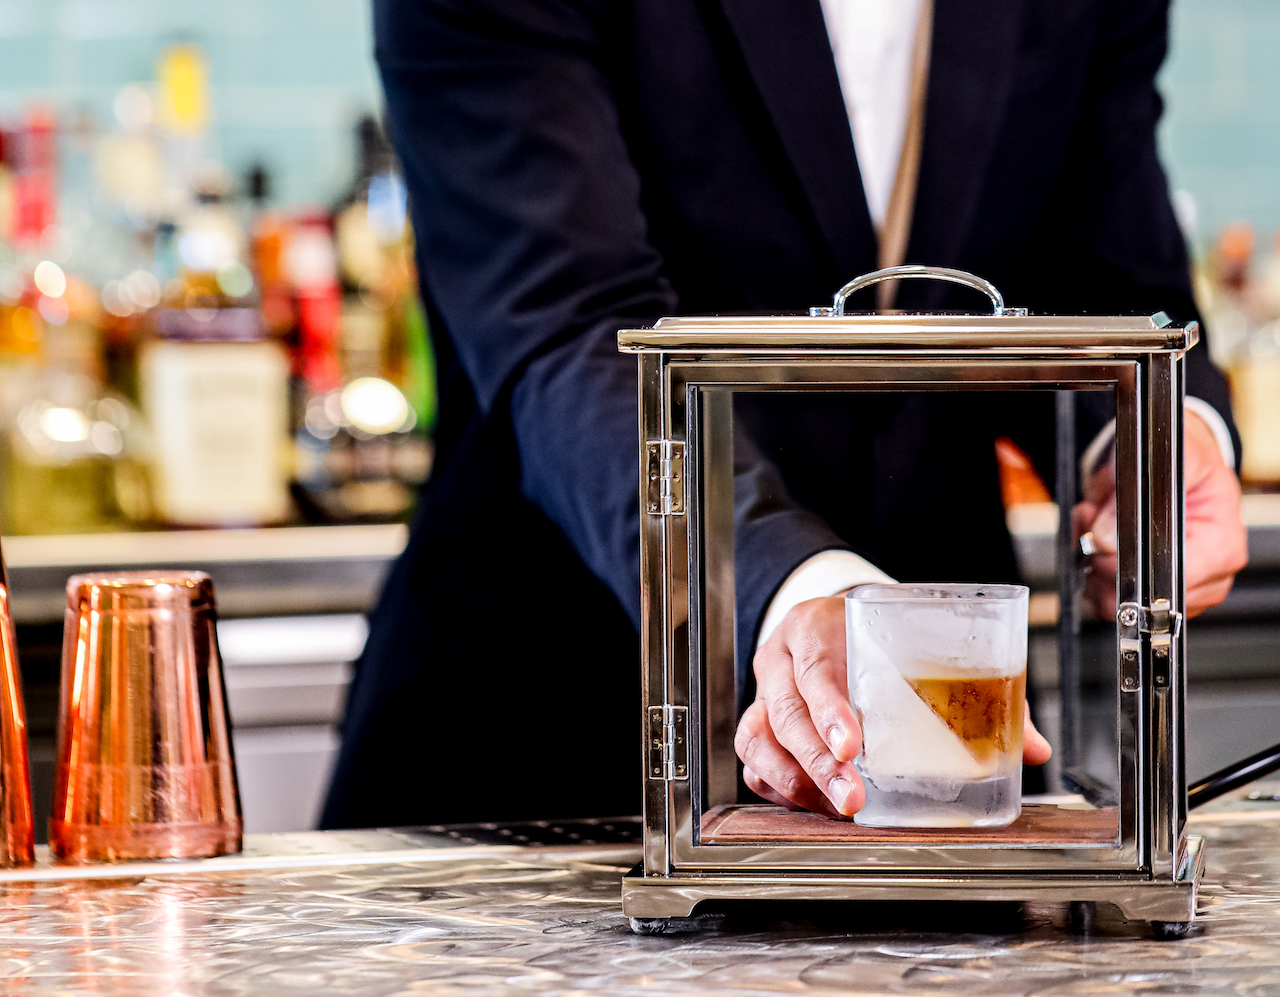 Oceania Cruises is reaching new pinnacles of creativity and diversity with the introduction of an elevated, innovative bar programme aboard the 1,200-guest Vista, debuting 20 May 2023.